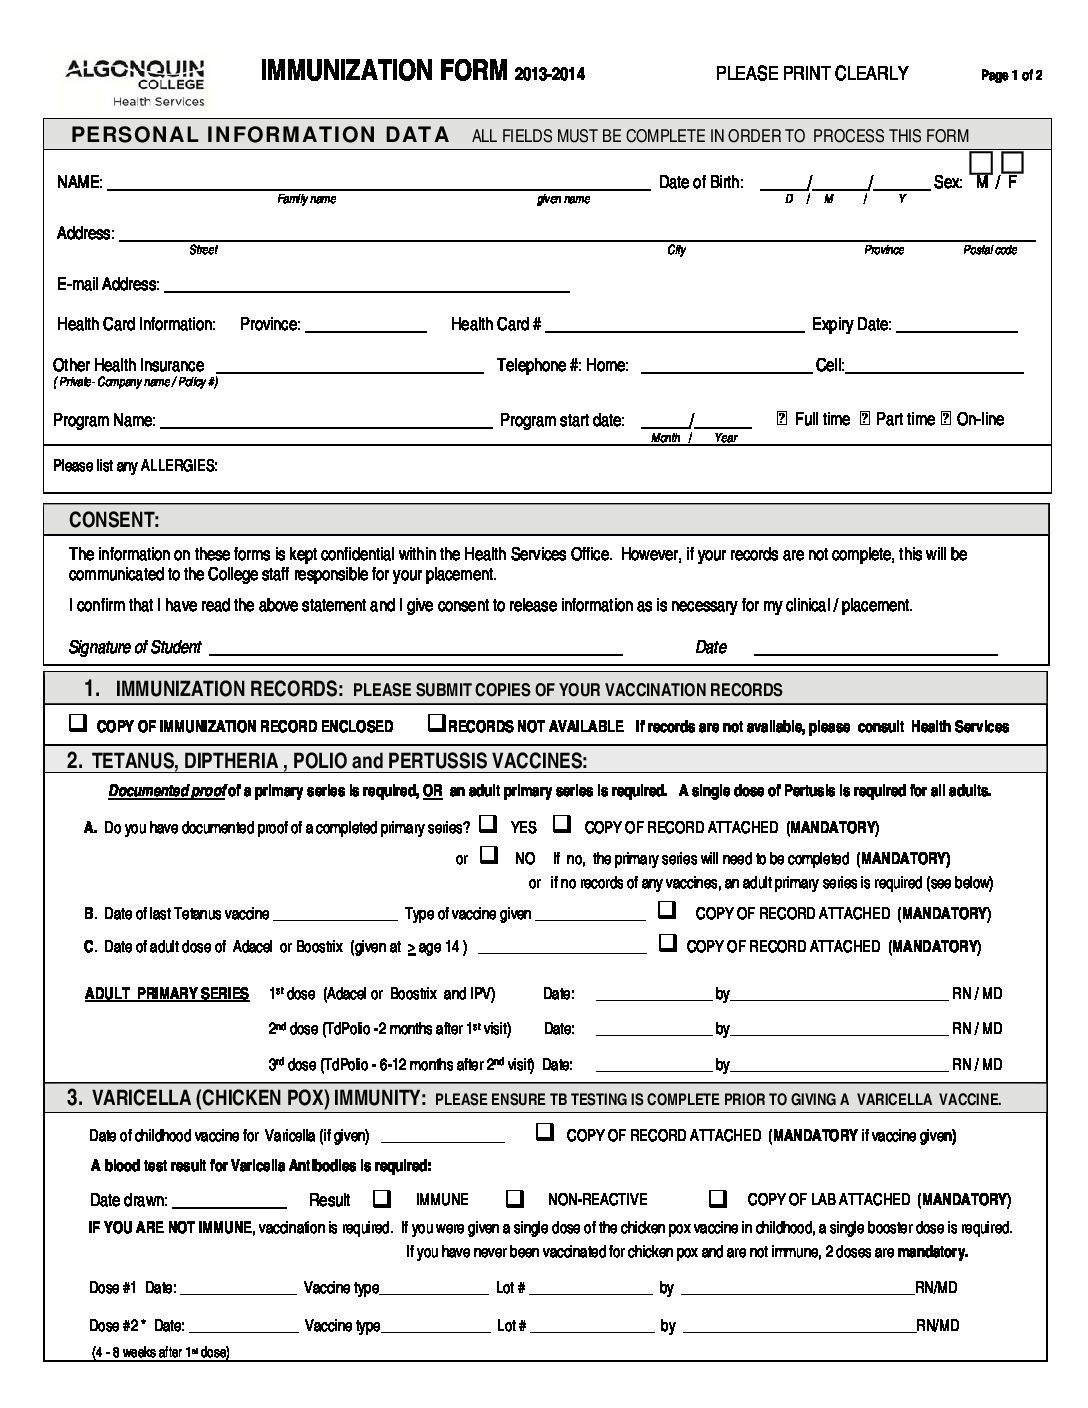 fillable-immunization-form-printable-forms-free-online